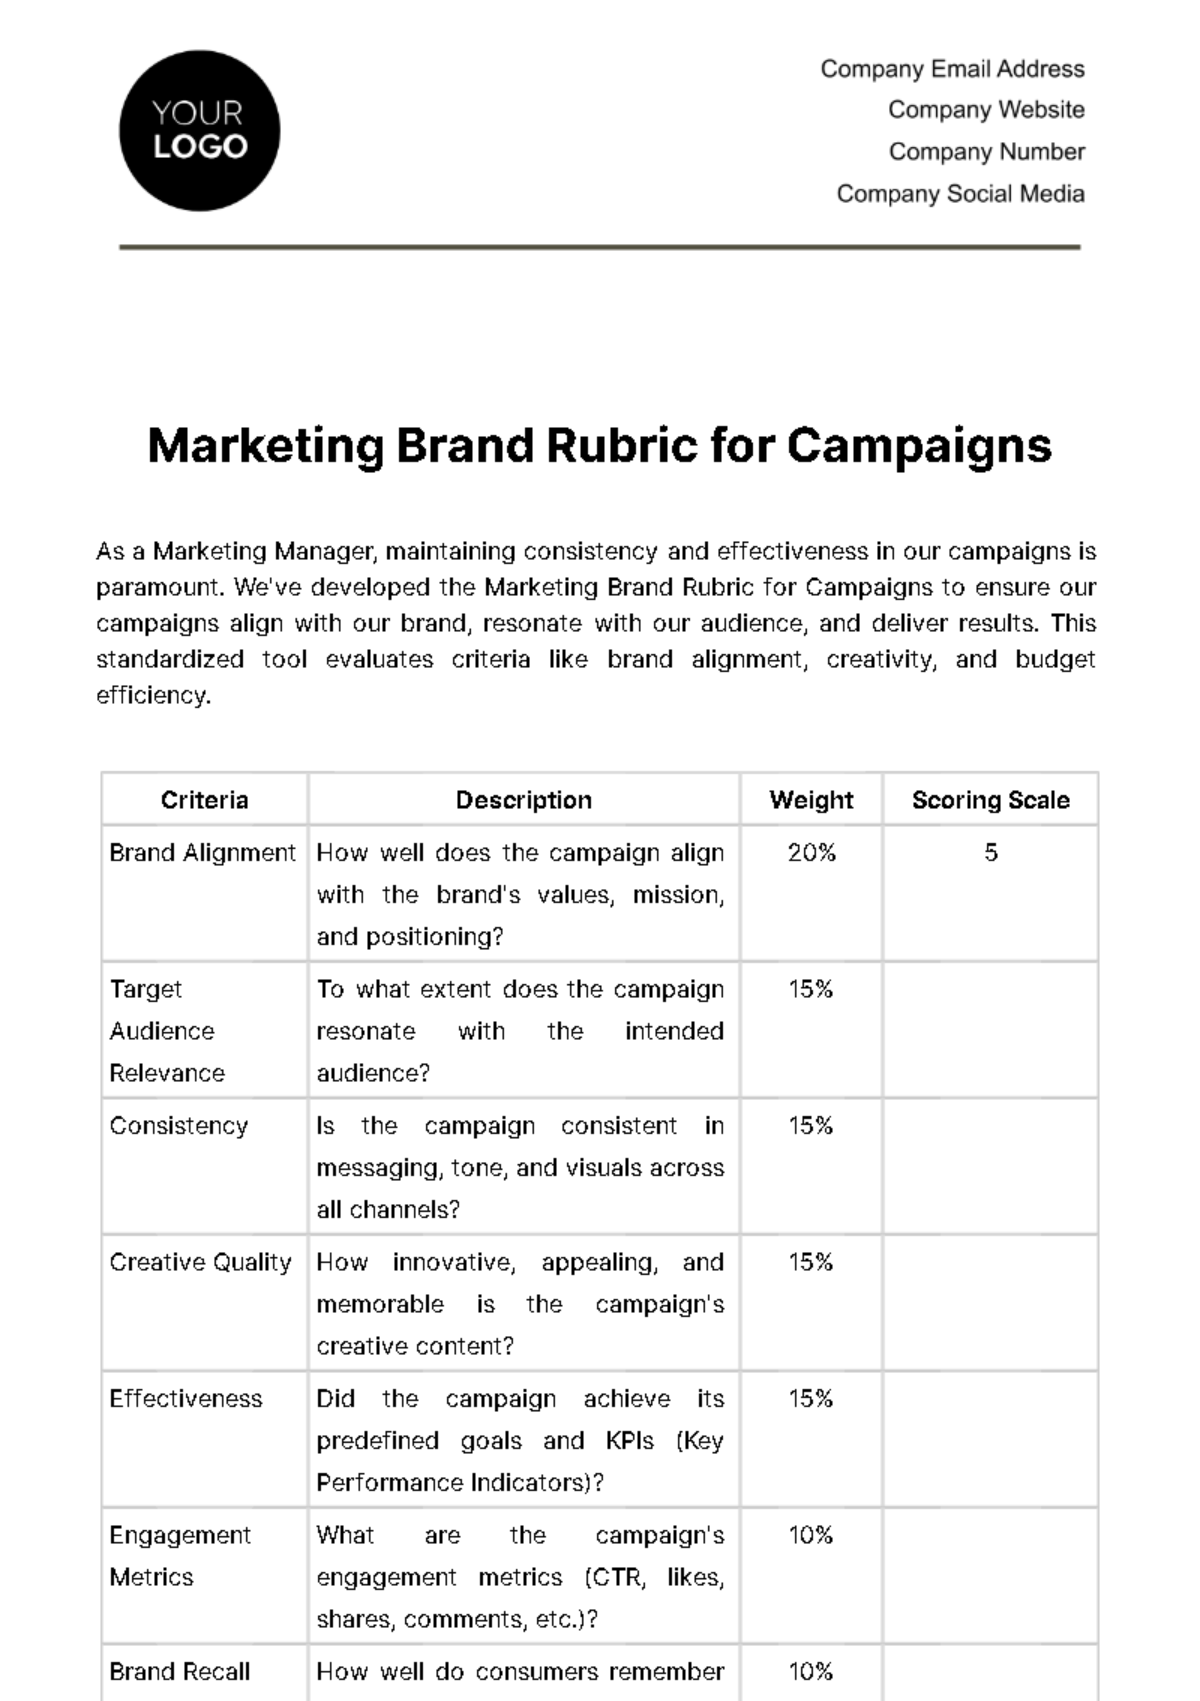 Marketing Brand Rubric for Campaigns Template